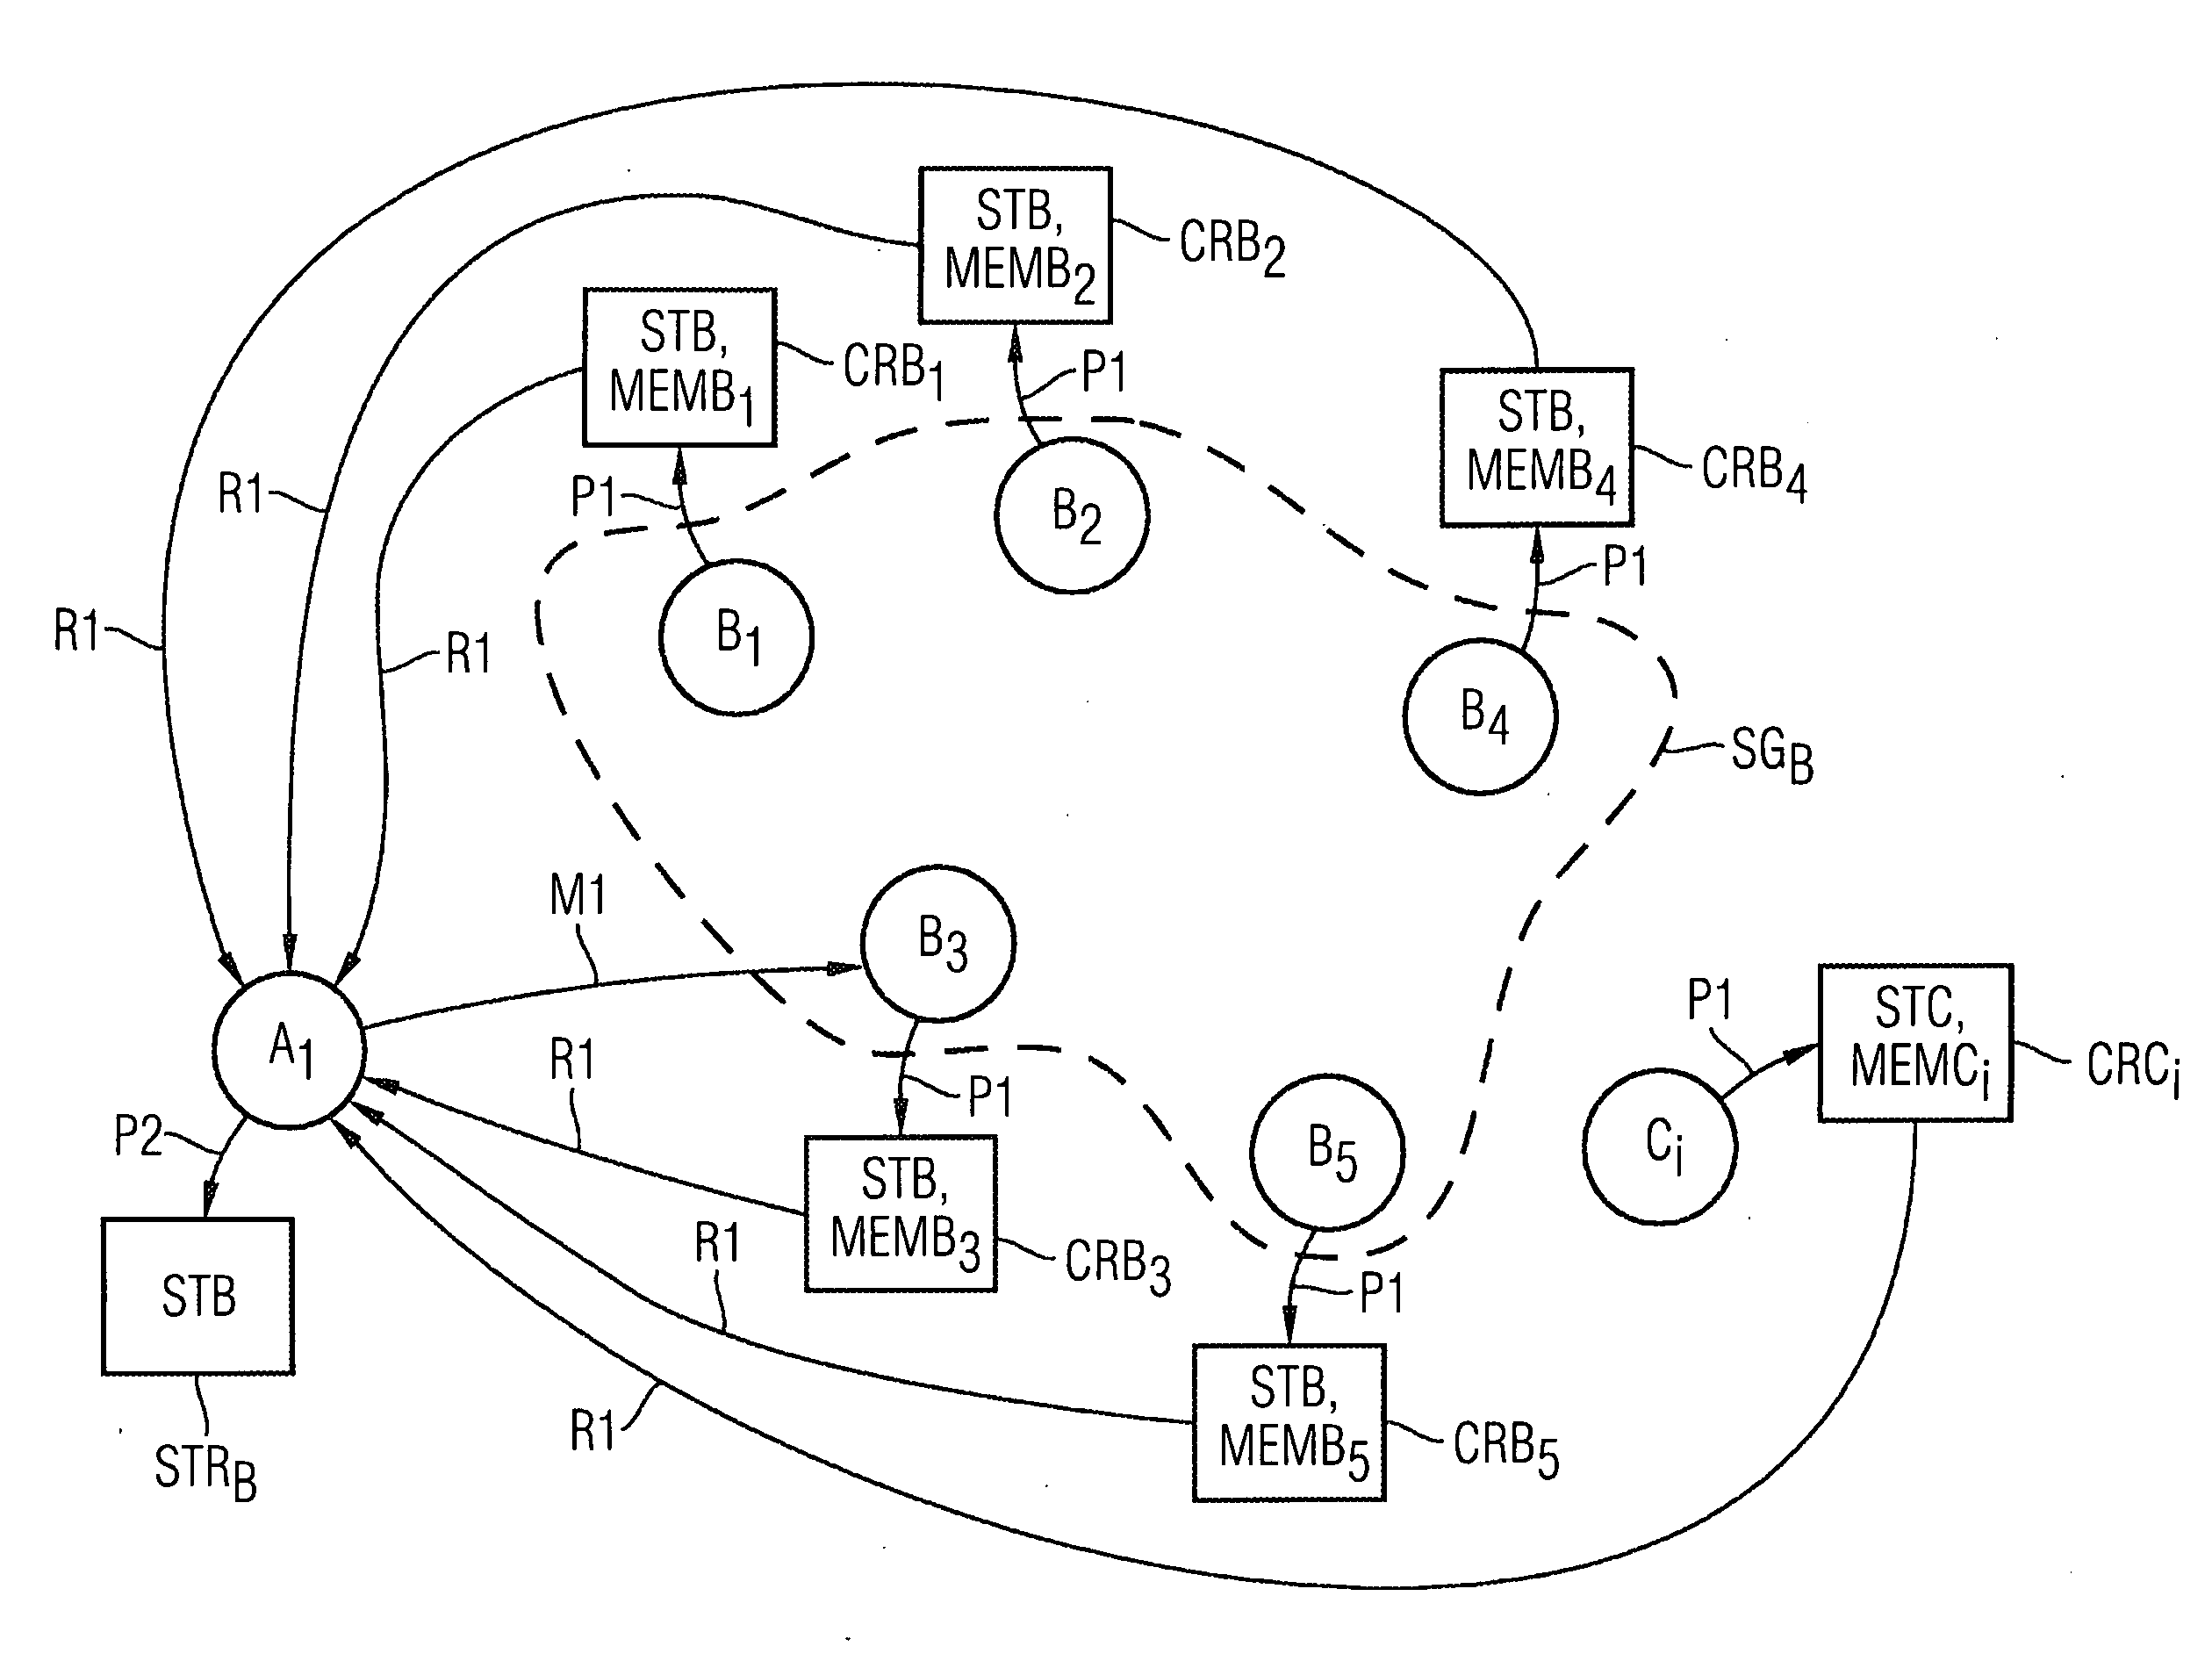 Method for Providing Composed Services in a Peer-To-Peer Network